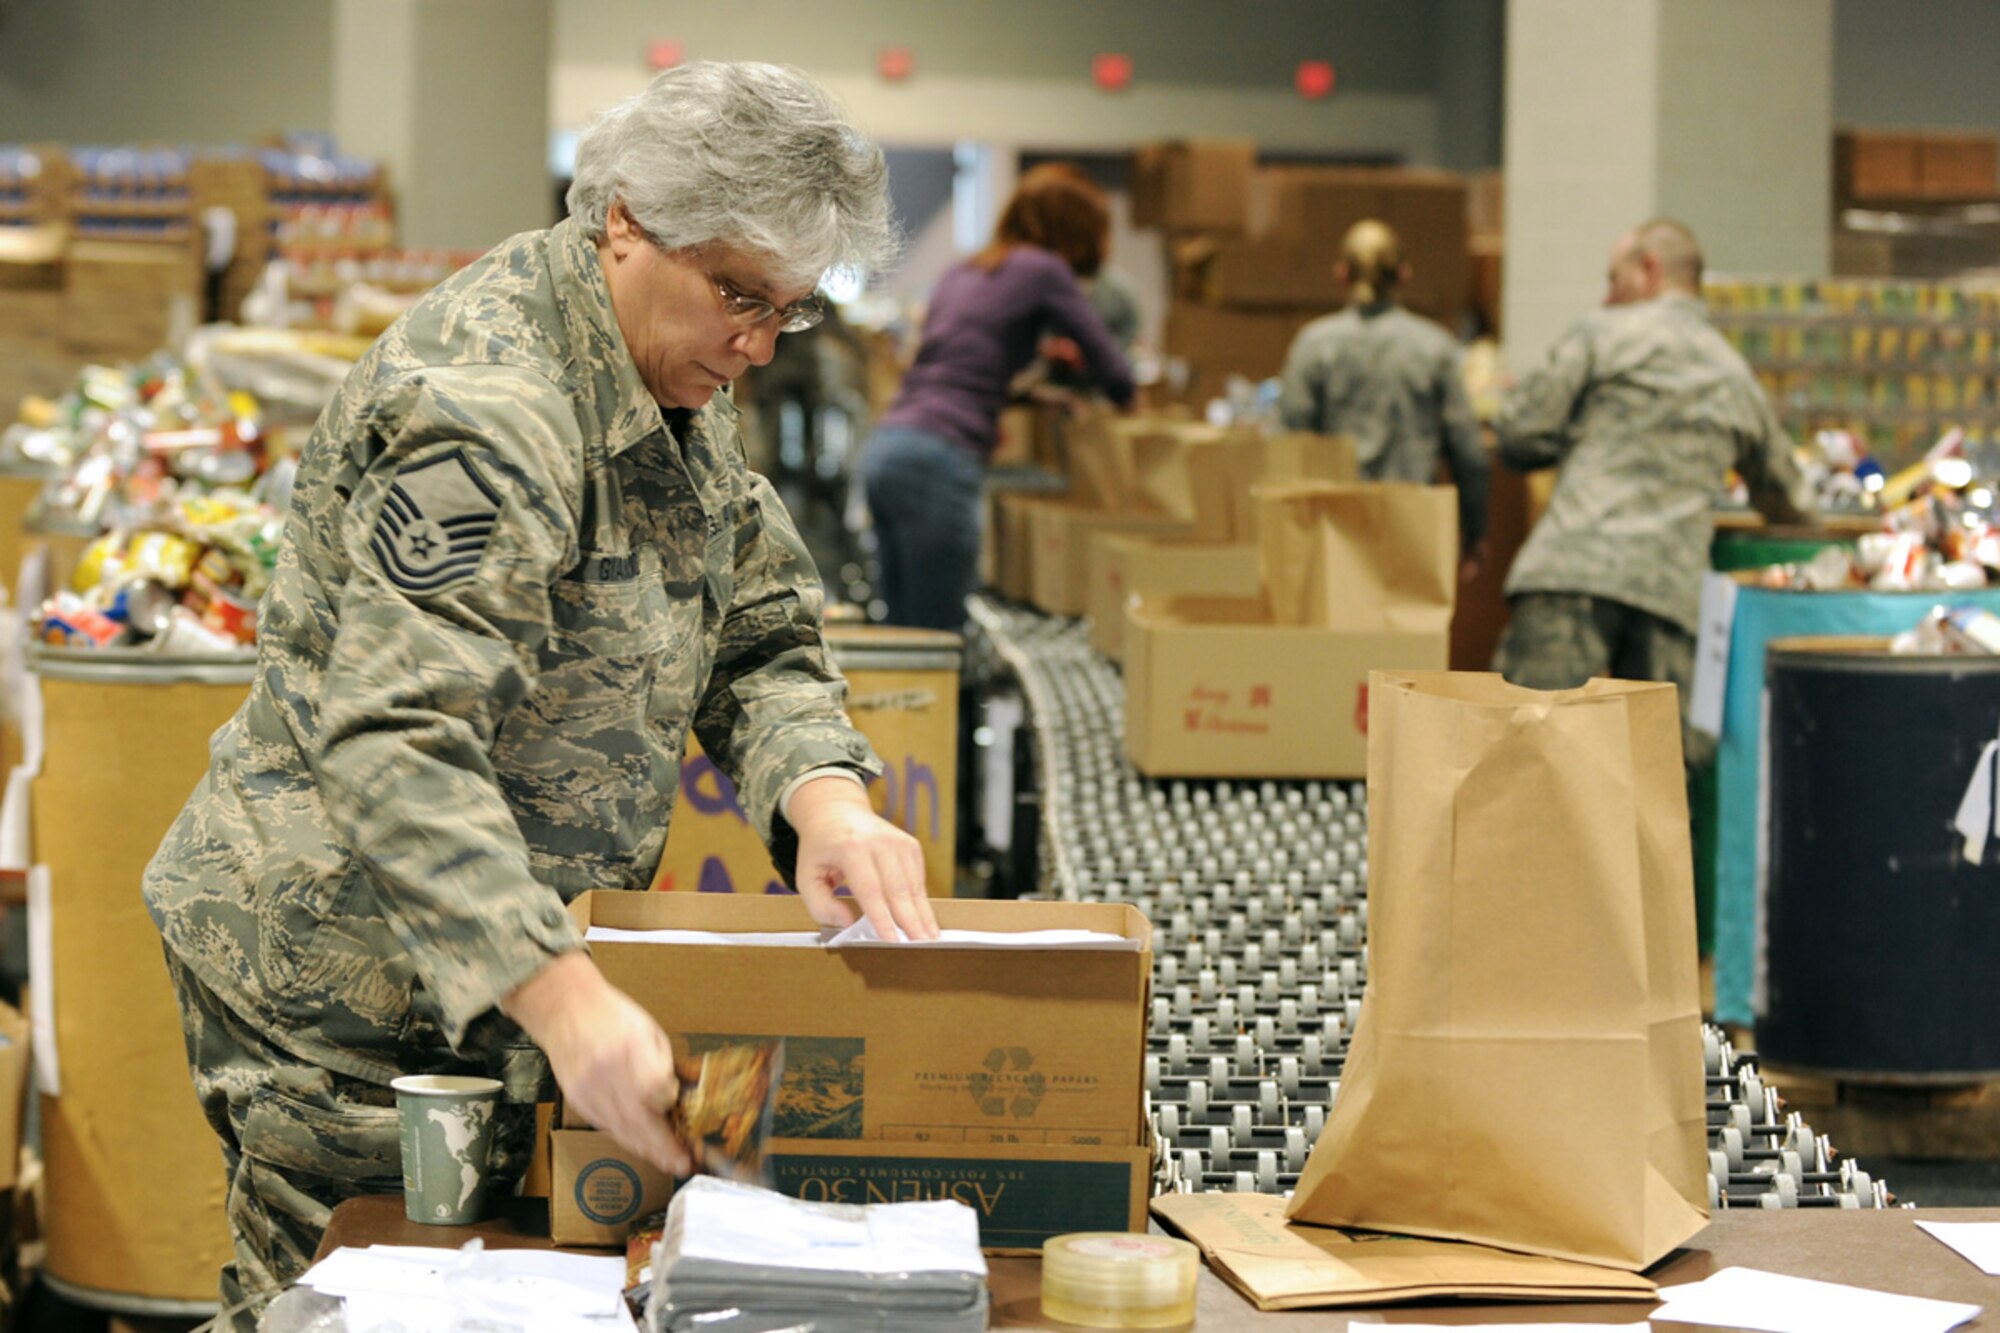 US Air Force Master Sgt. Donna M. Giambalvo packs a box at the Oncenter Complex in Syracuse, NY on 22 Dec. 2009. Giambalvo was volunteering at the Annual Christmas Bureau Salvation Army Food and Gift drive supplying needy families with gifts for their children and food for their Holiday meal. (US Air Force photo by Tech. Sgt. Jeremy M. Call/Released)